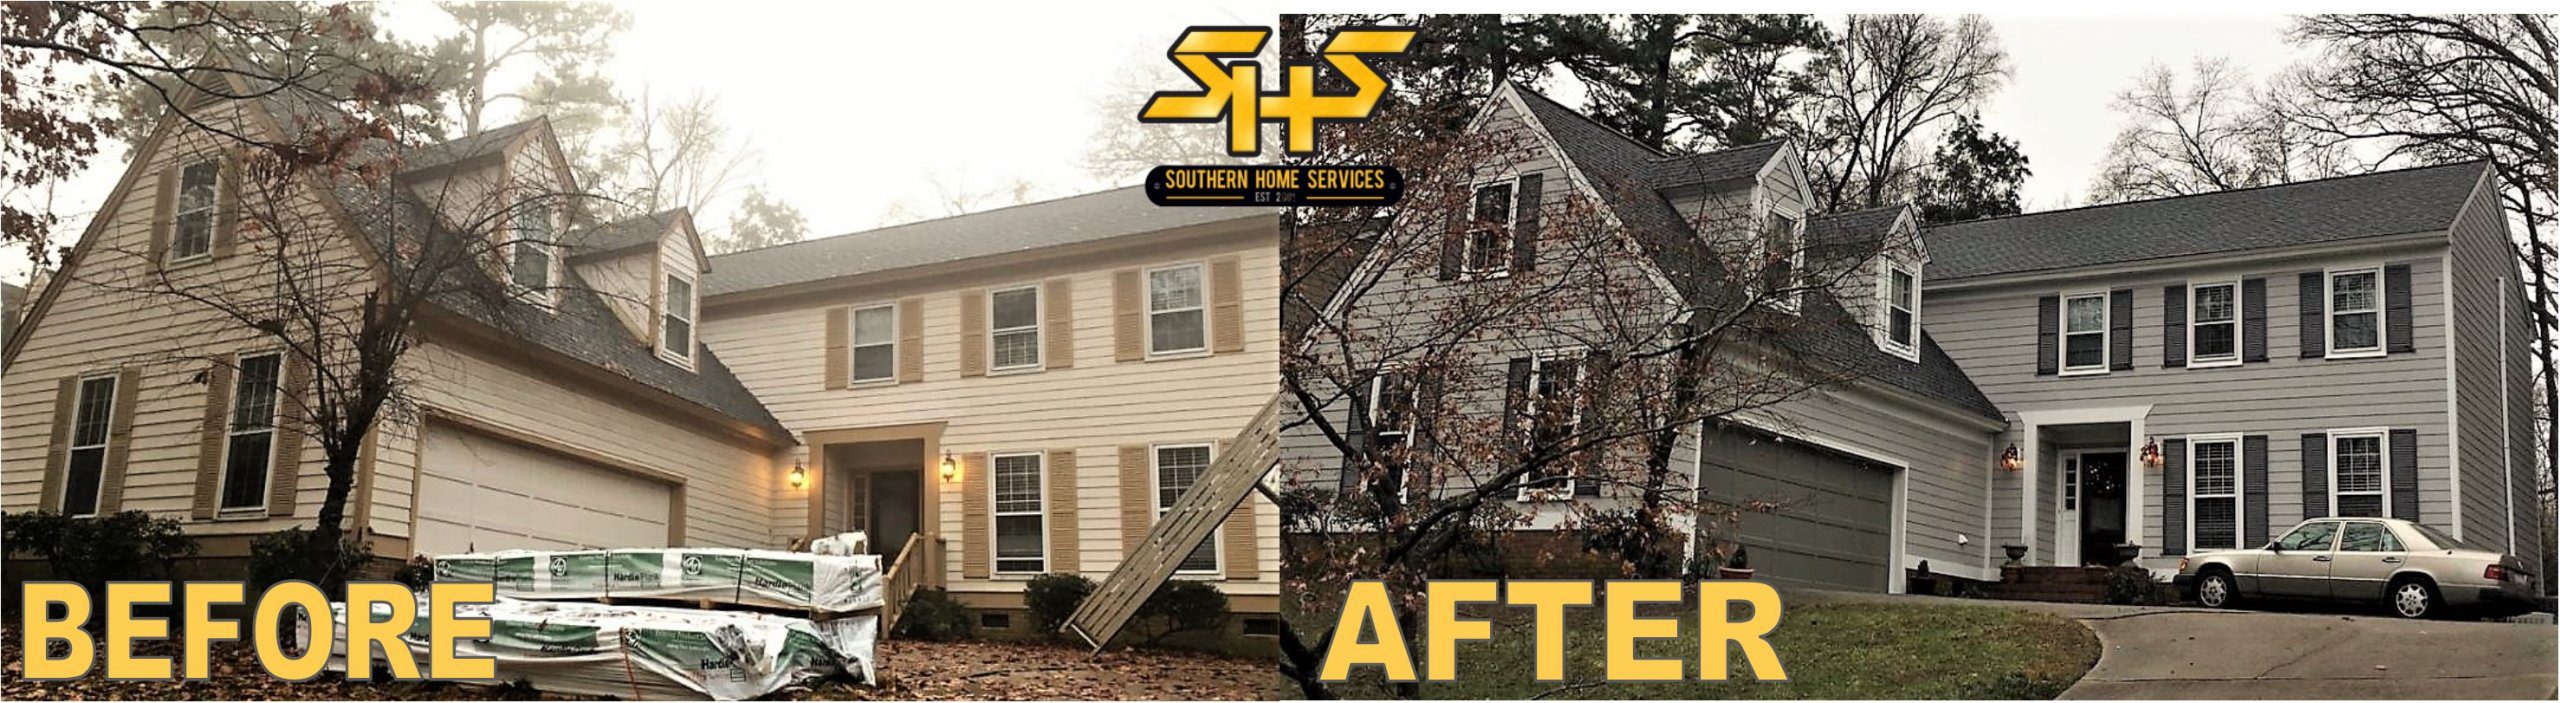 siding and exterior trim replacement in Charlotte, NC